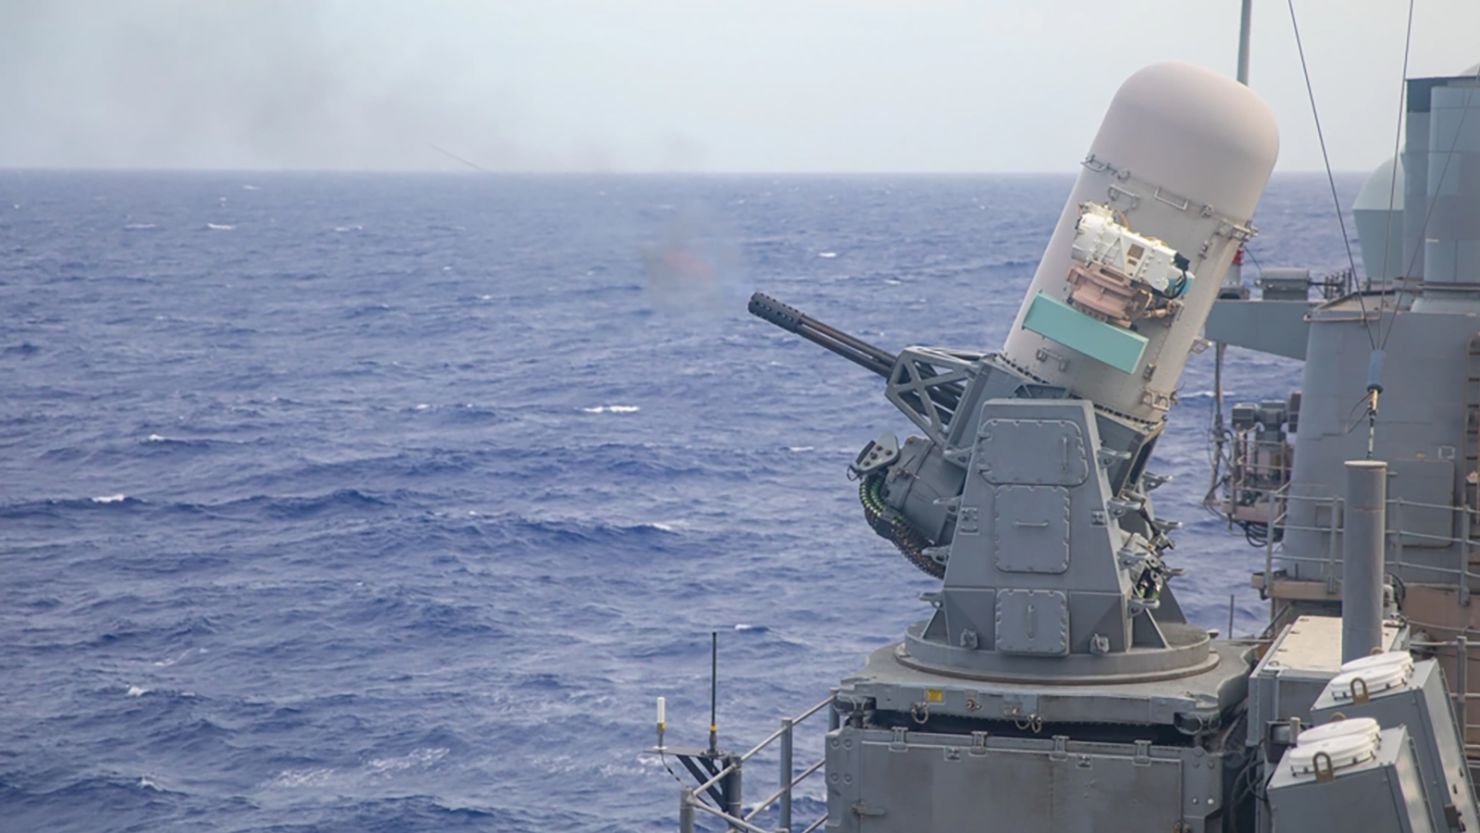 The guided-missile cruiser USS Antietam fires a Phalanx Close-In Weapon System (CIWS) during a live-fire exercise, Philippine Sea, on June 6, 2022.